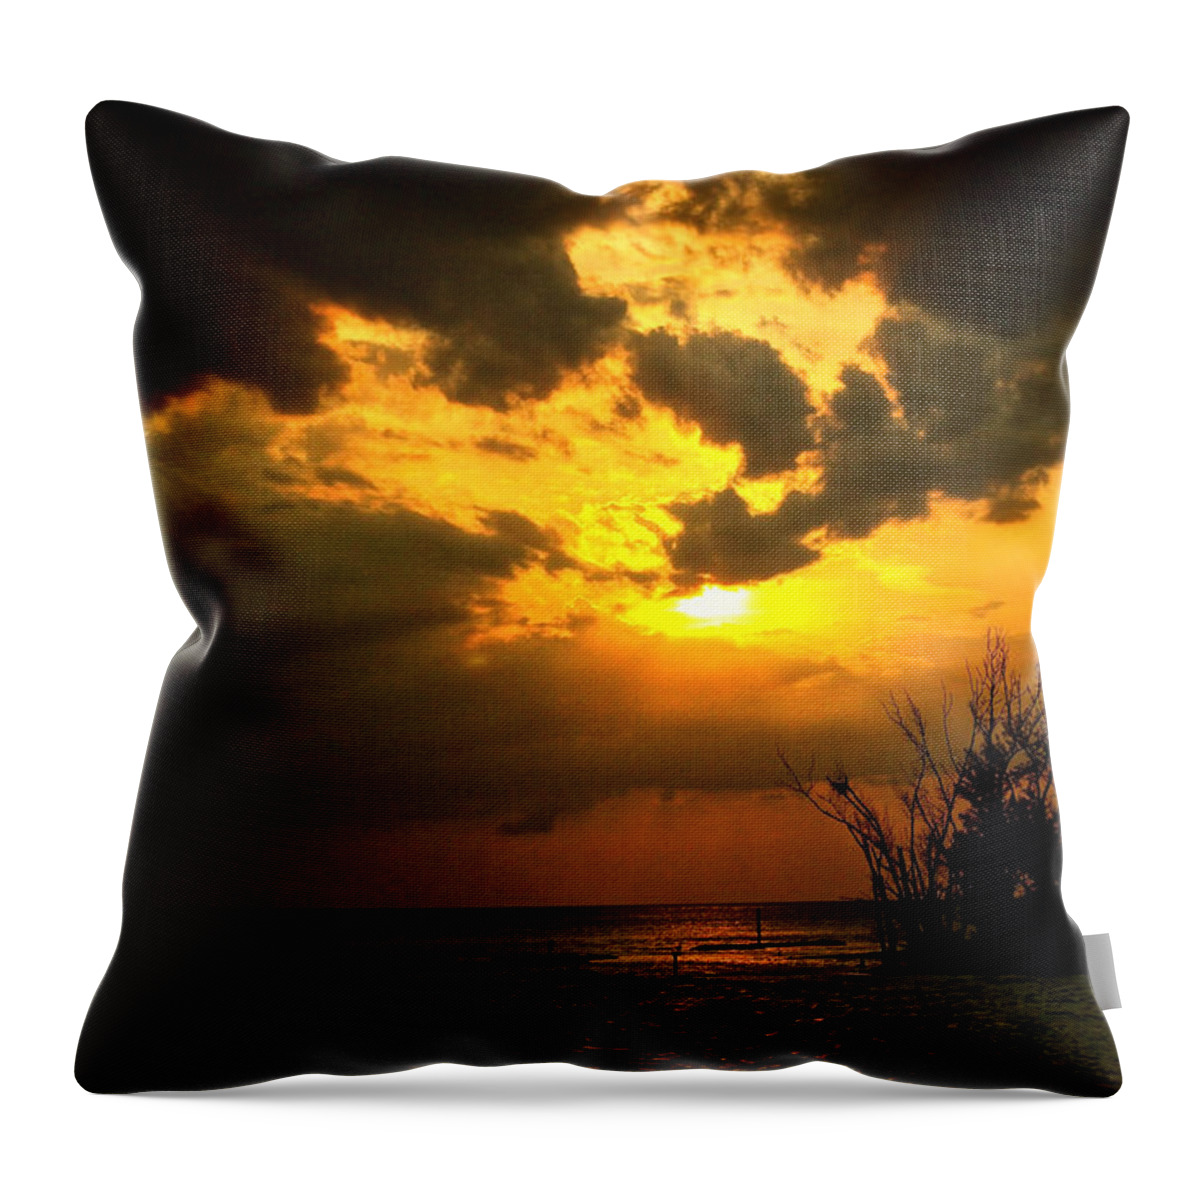 Captiva Island Throw Pillow featuring the photograph Captiva Island Ends the Day by Kandy Hurley